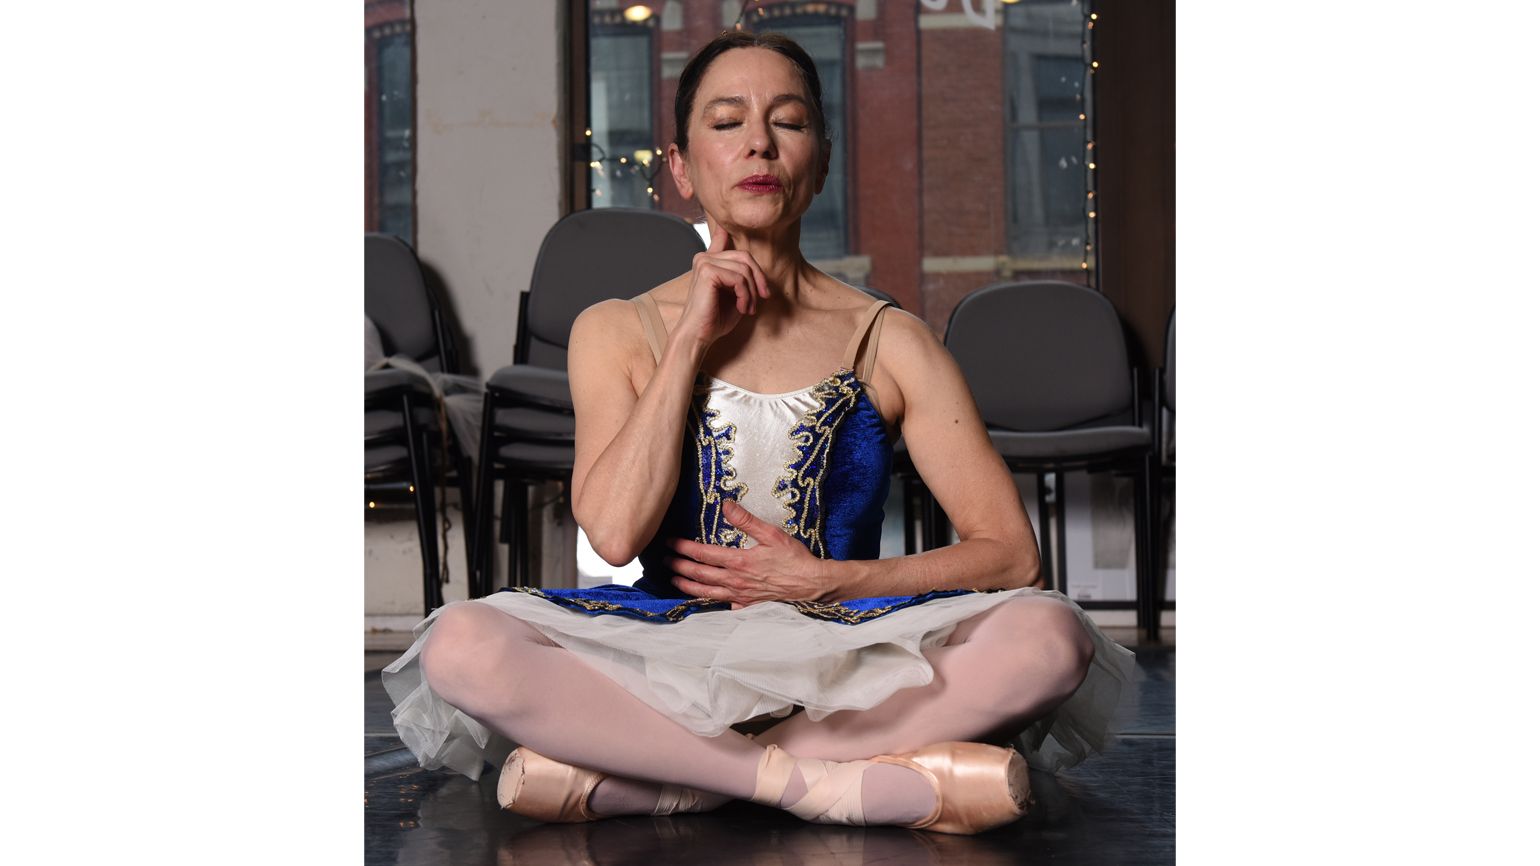 Tips on Coping with Pain: Ballet dancer Deborah Novak breathes slowly to relax through pain better living health wellness healing